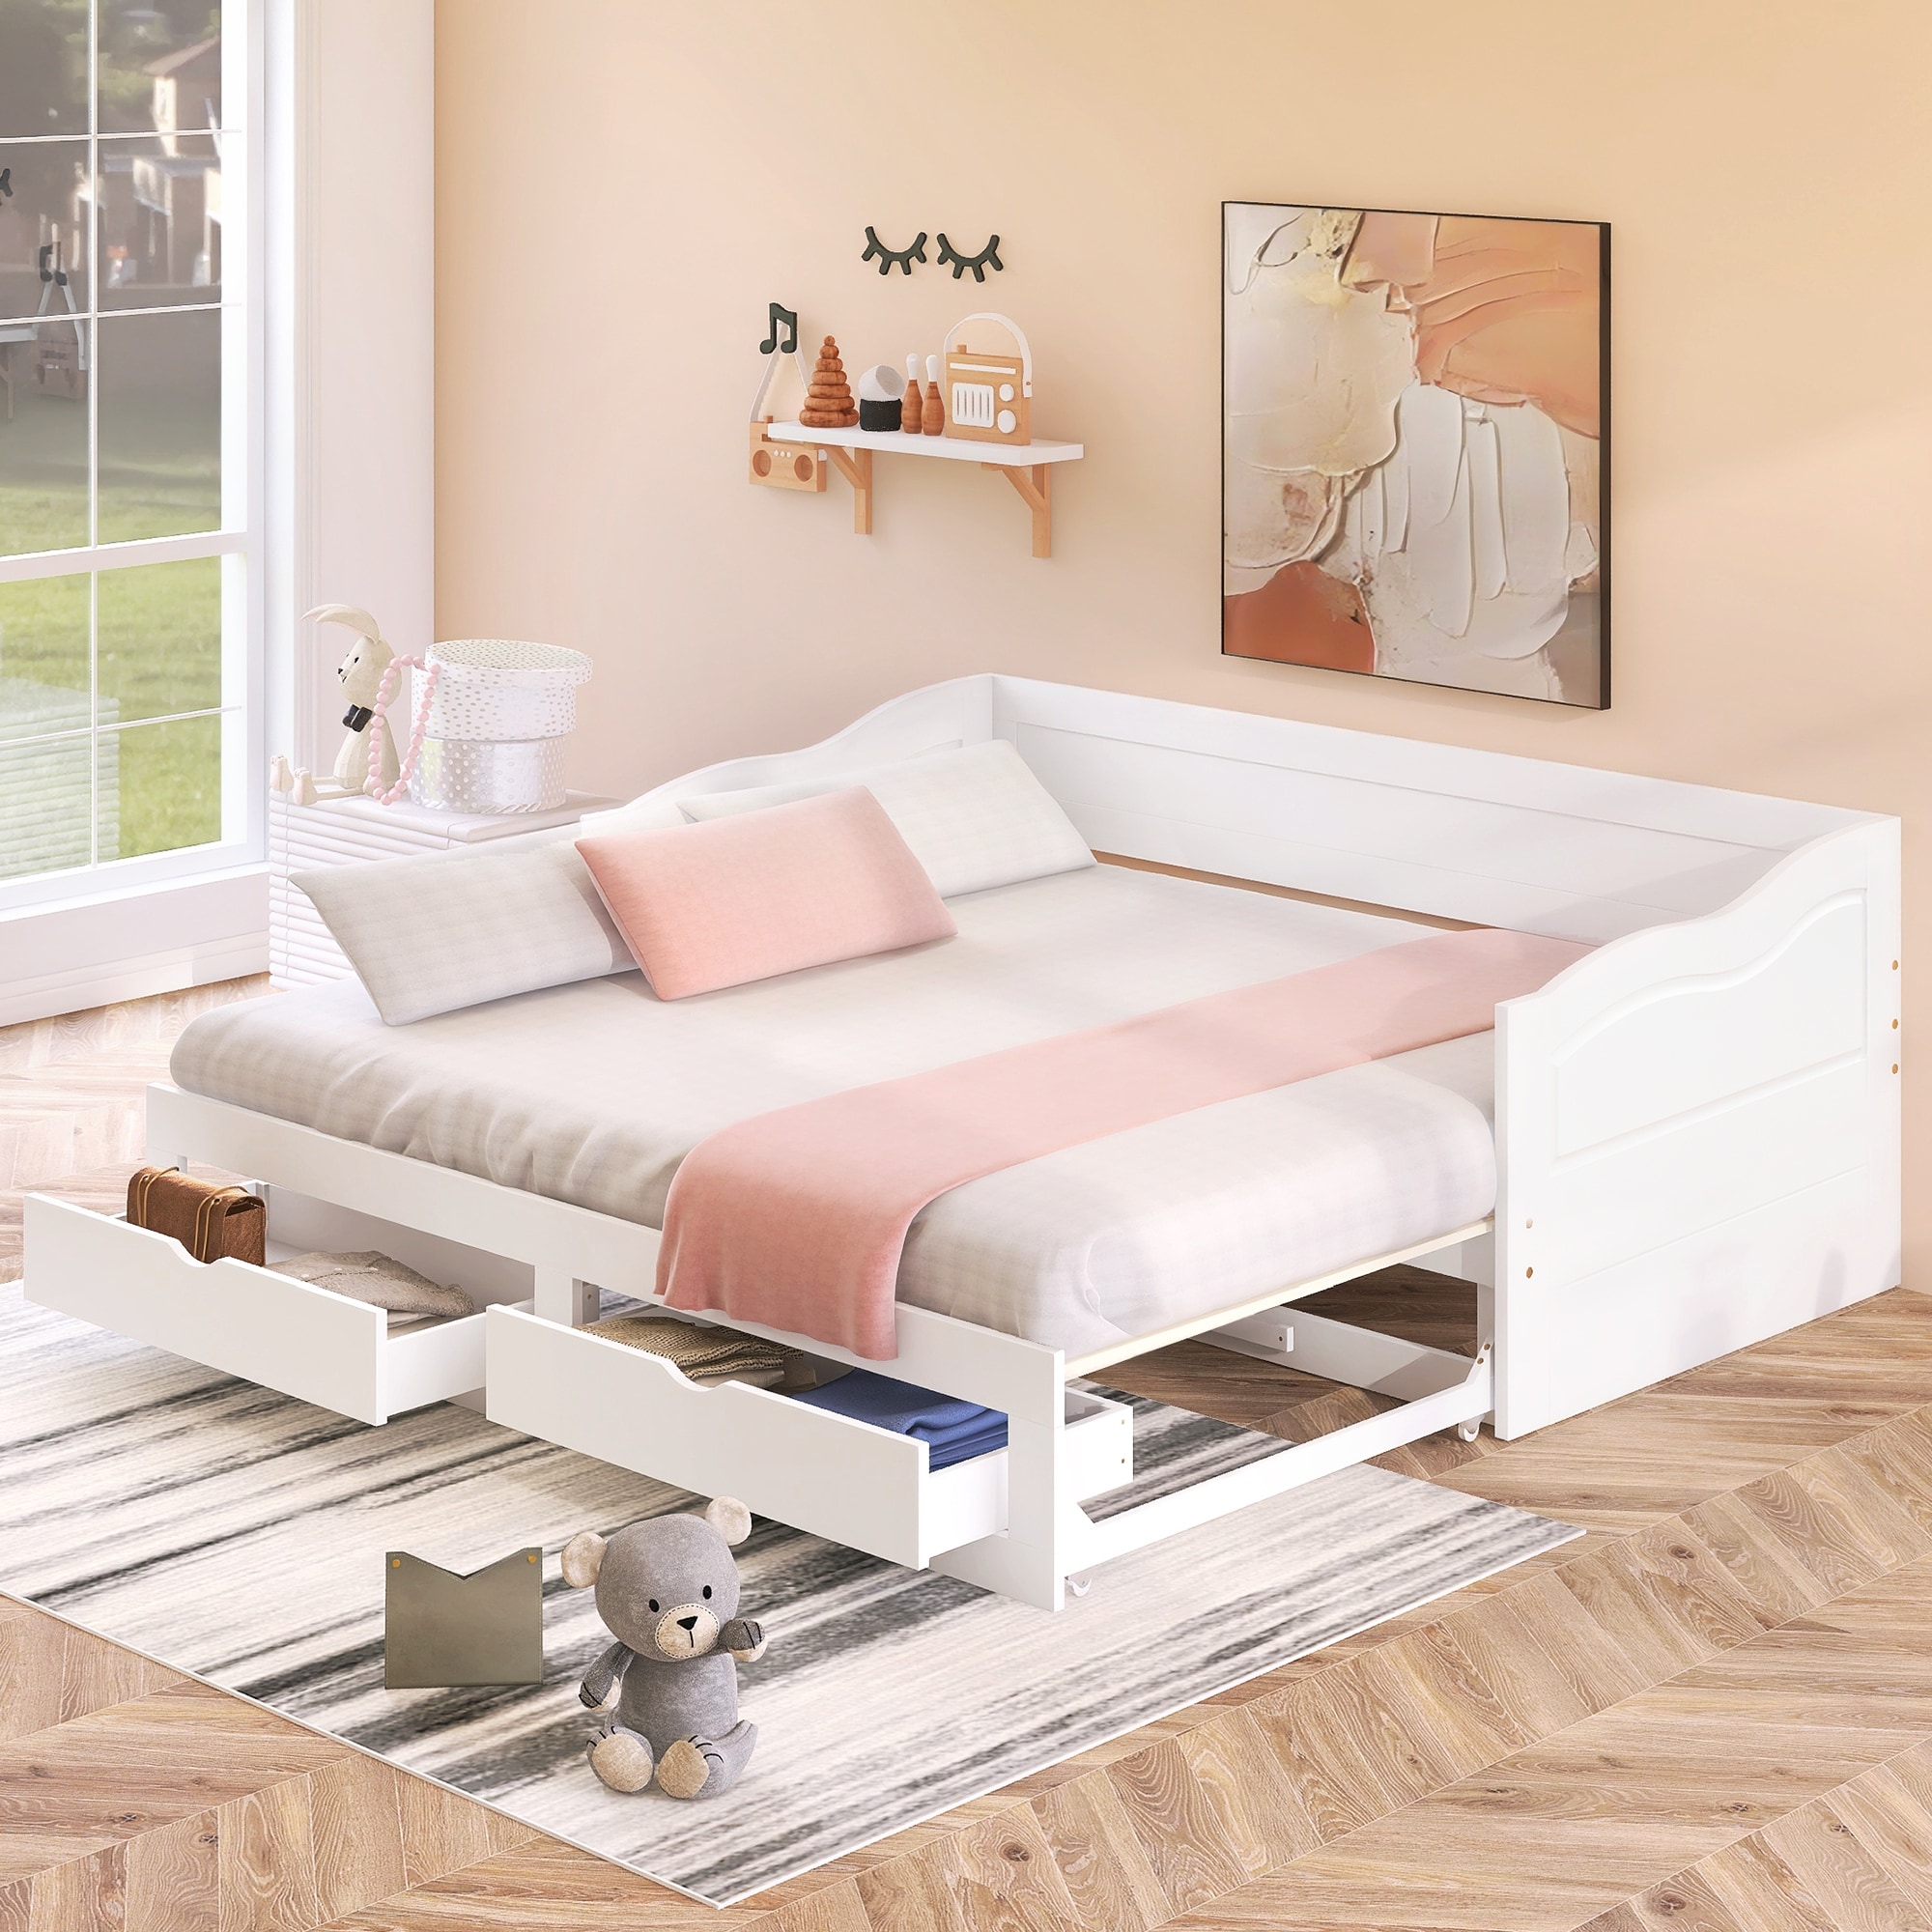 Extendable Design Wooden Daybed With Trundle Bed And Two Storage Drawers